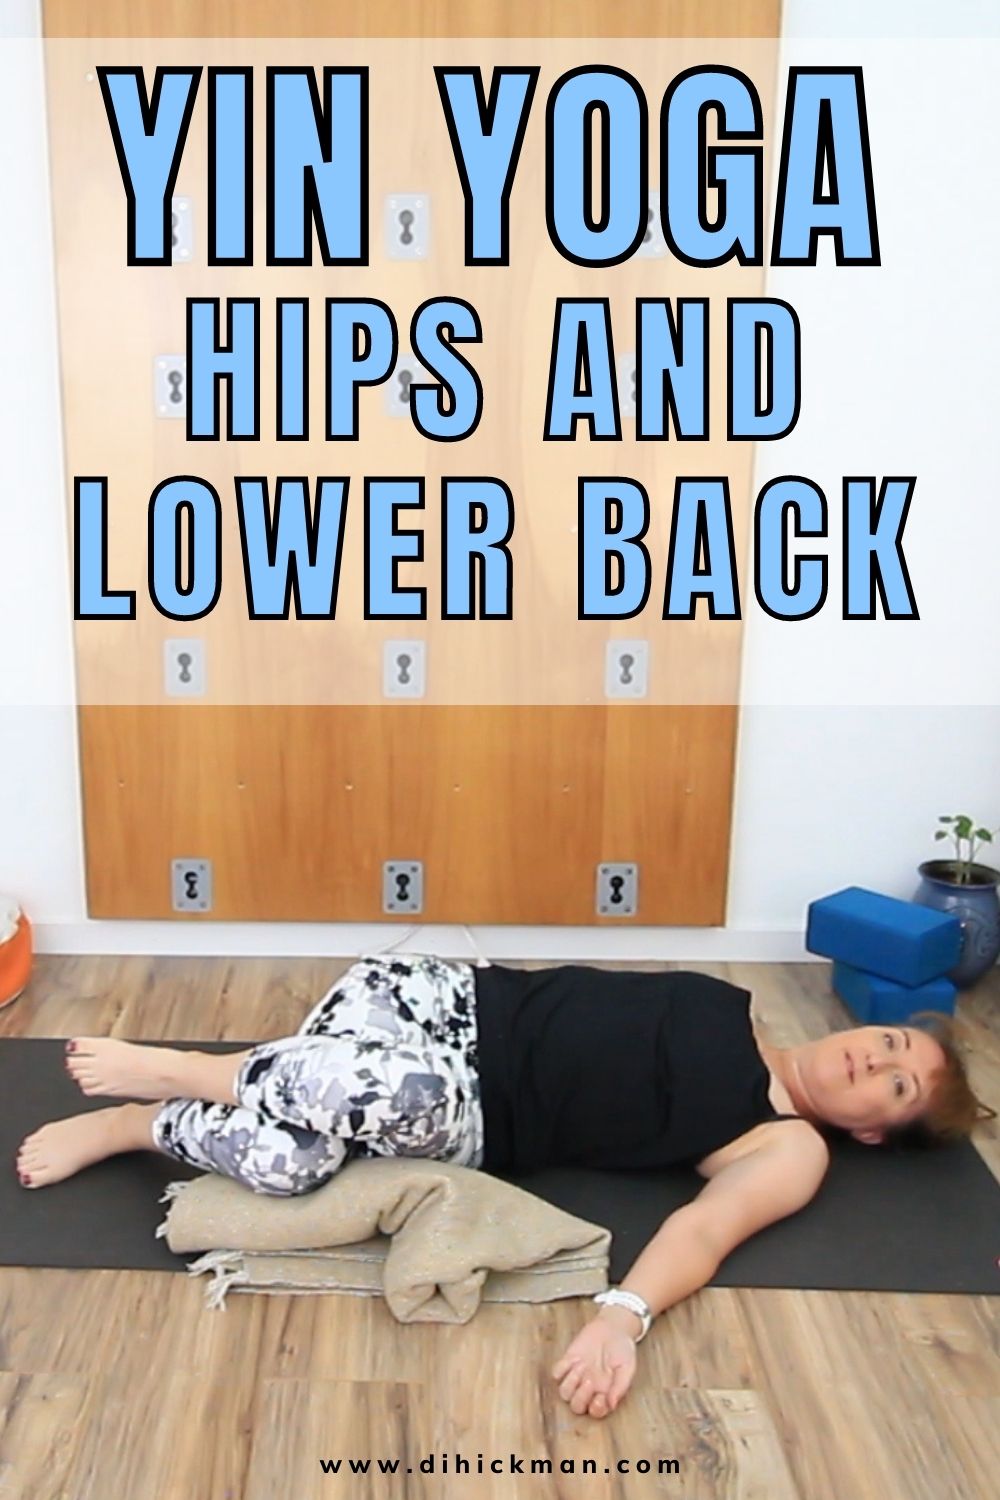 yin yoga hips and lower back